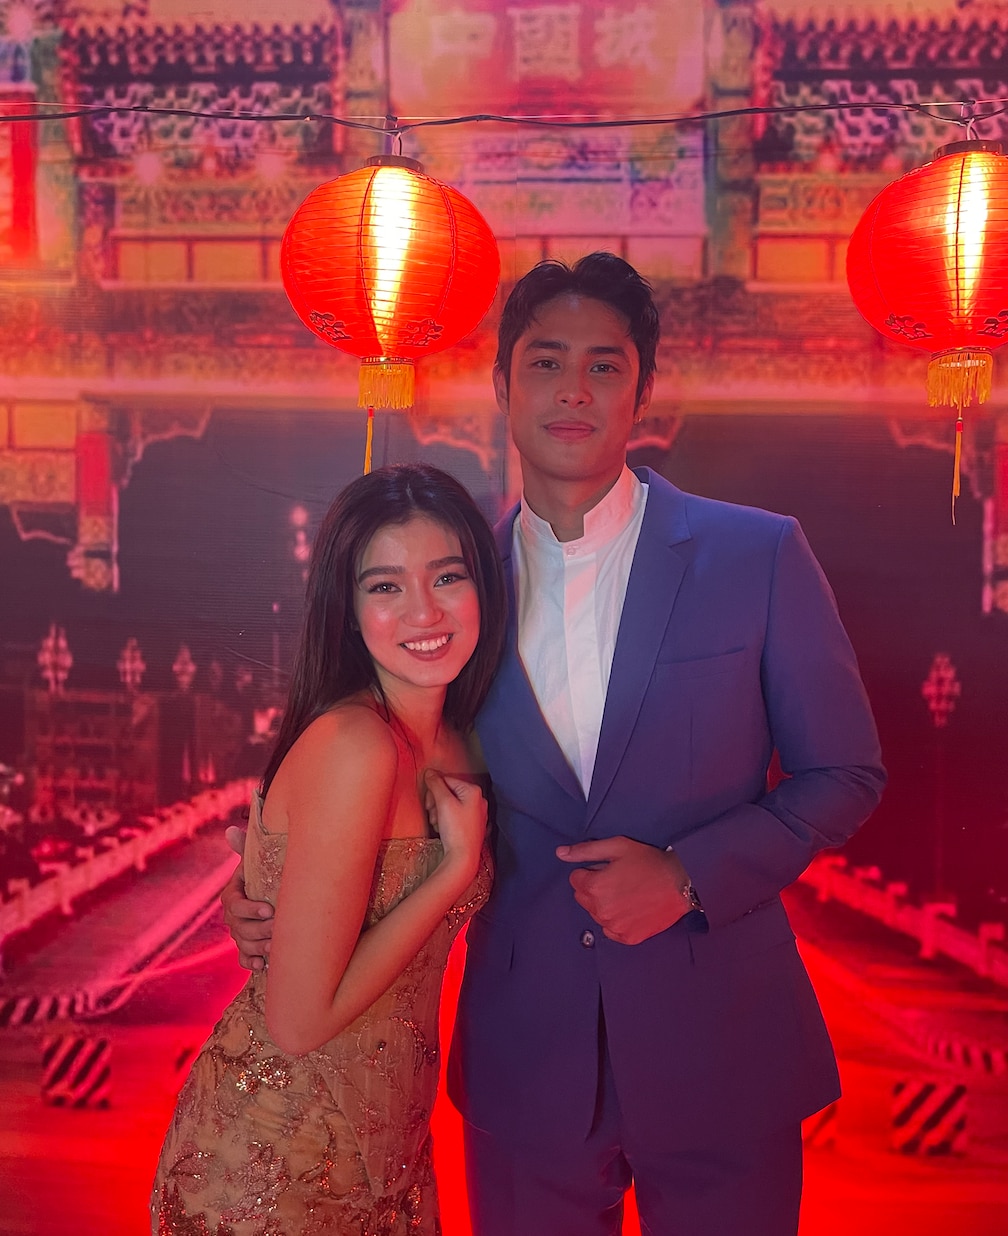 Donny and Belle tackle how love comes with a price in "Can't Buy Me Love"